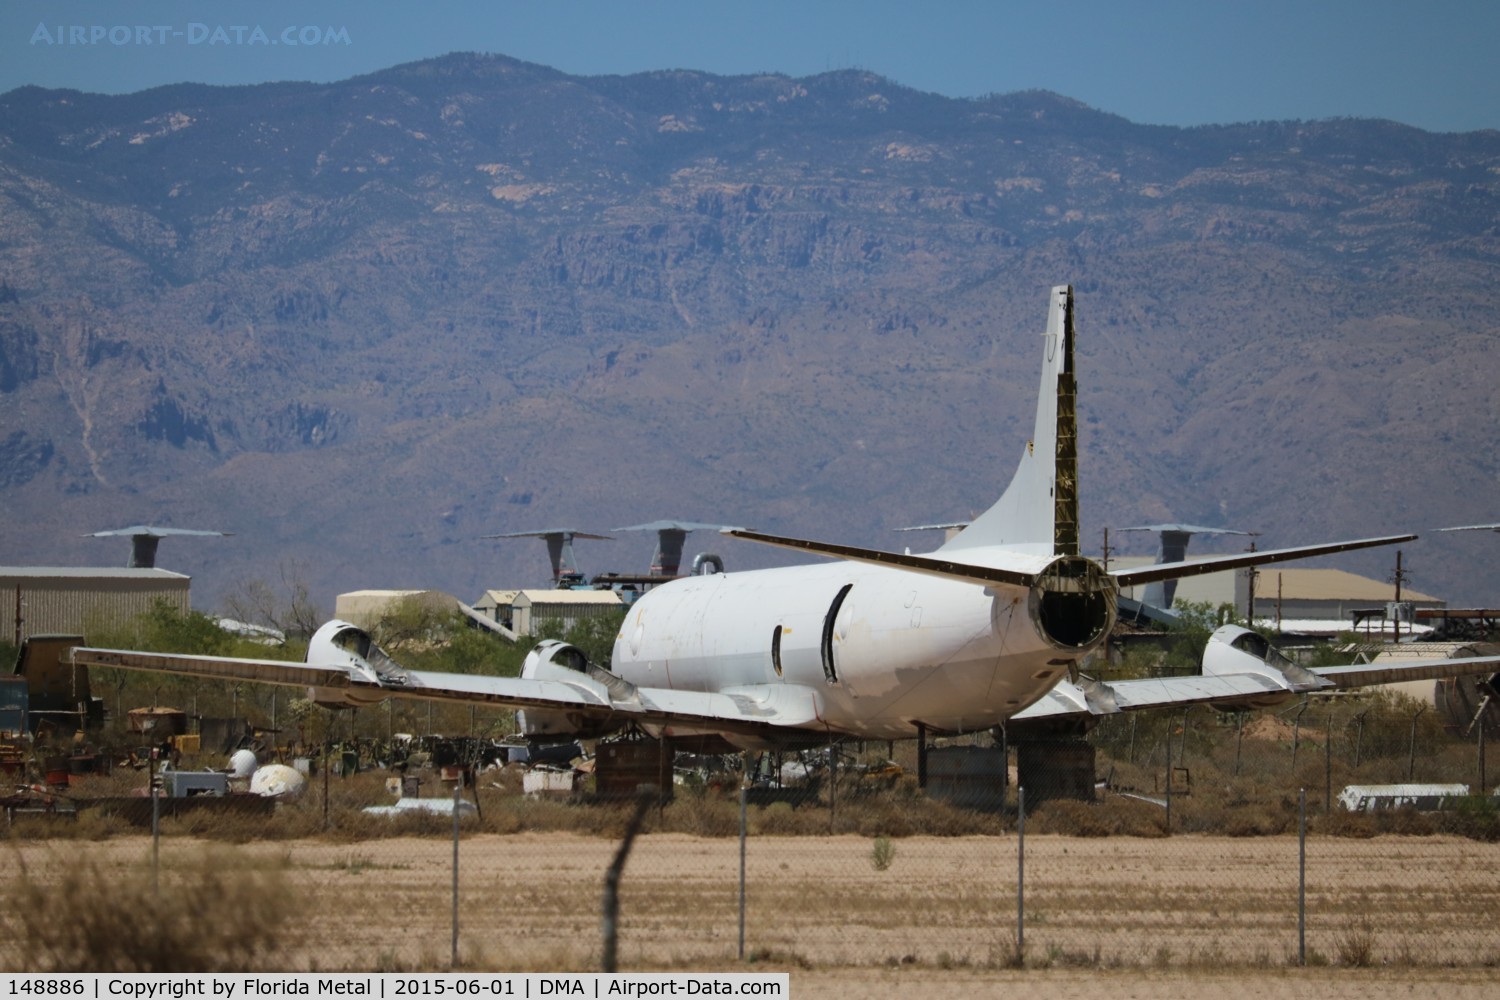 148886, Lockheed P-3A Orion C/N 185-5004, P-3A Orion